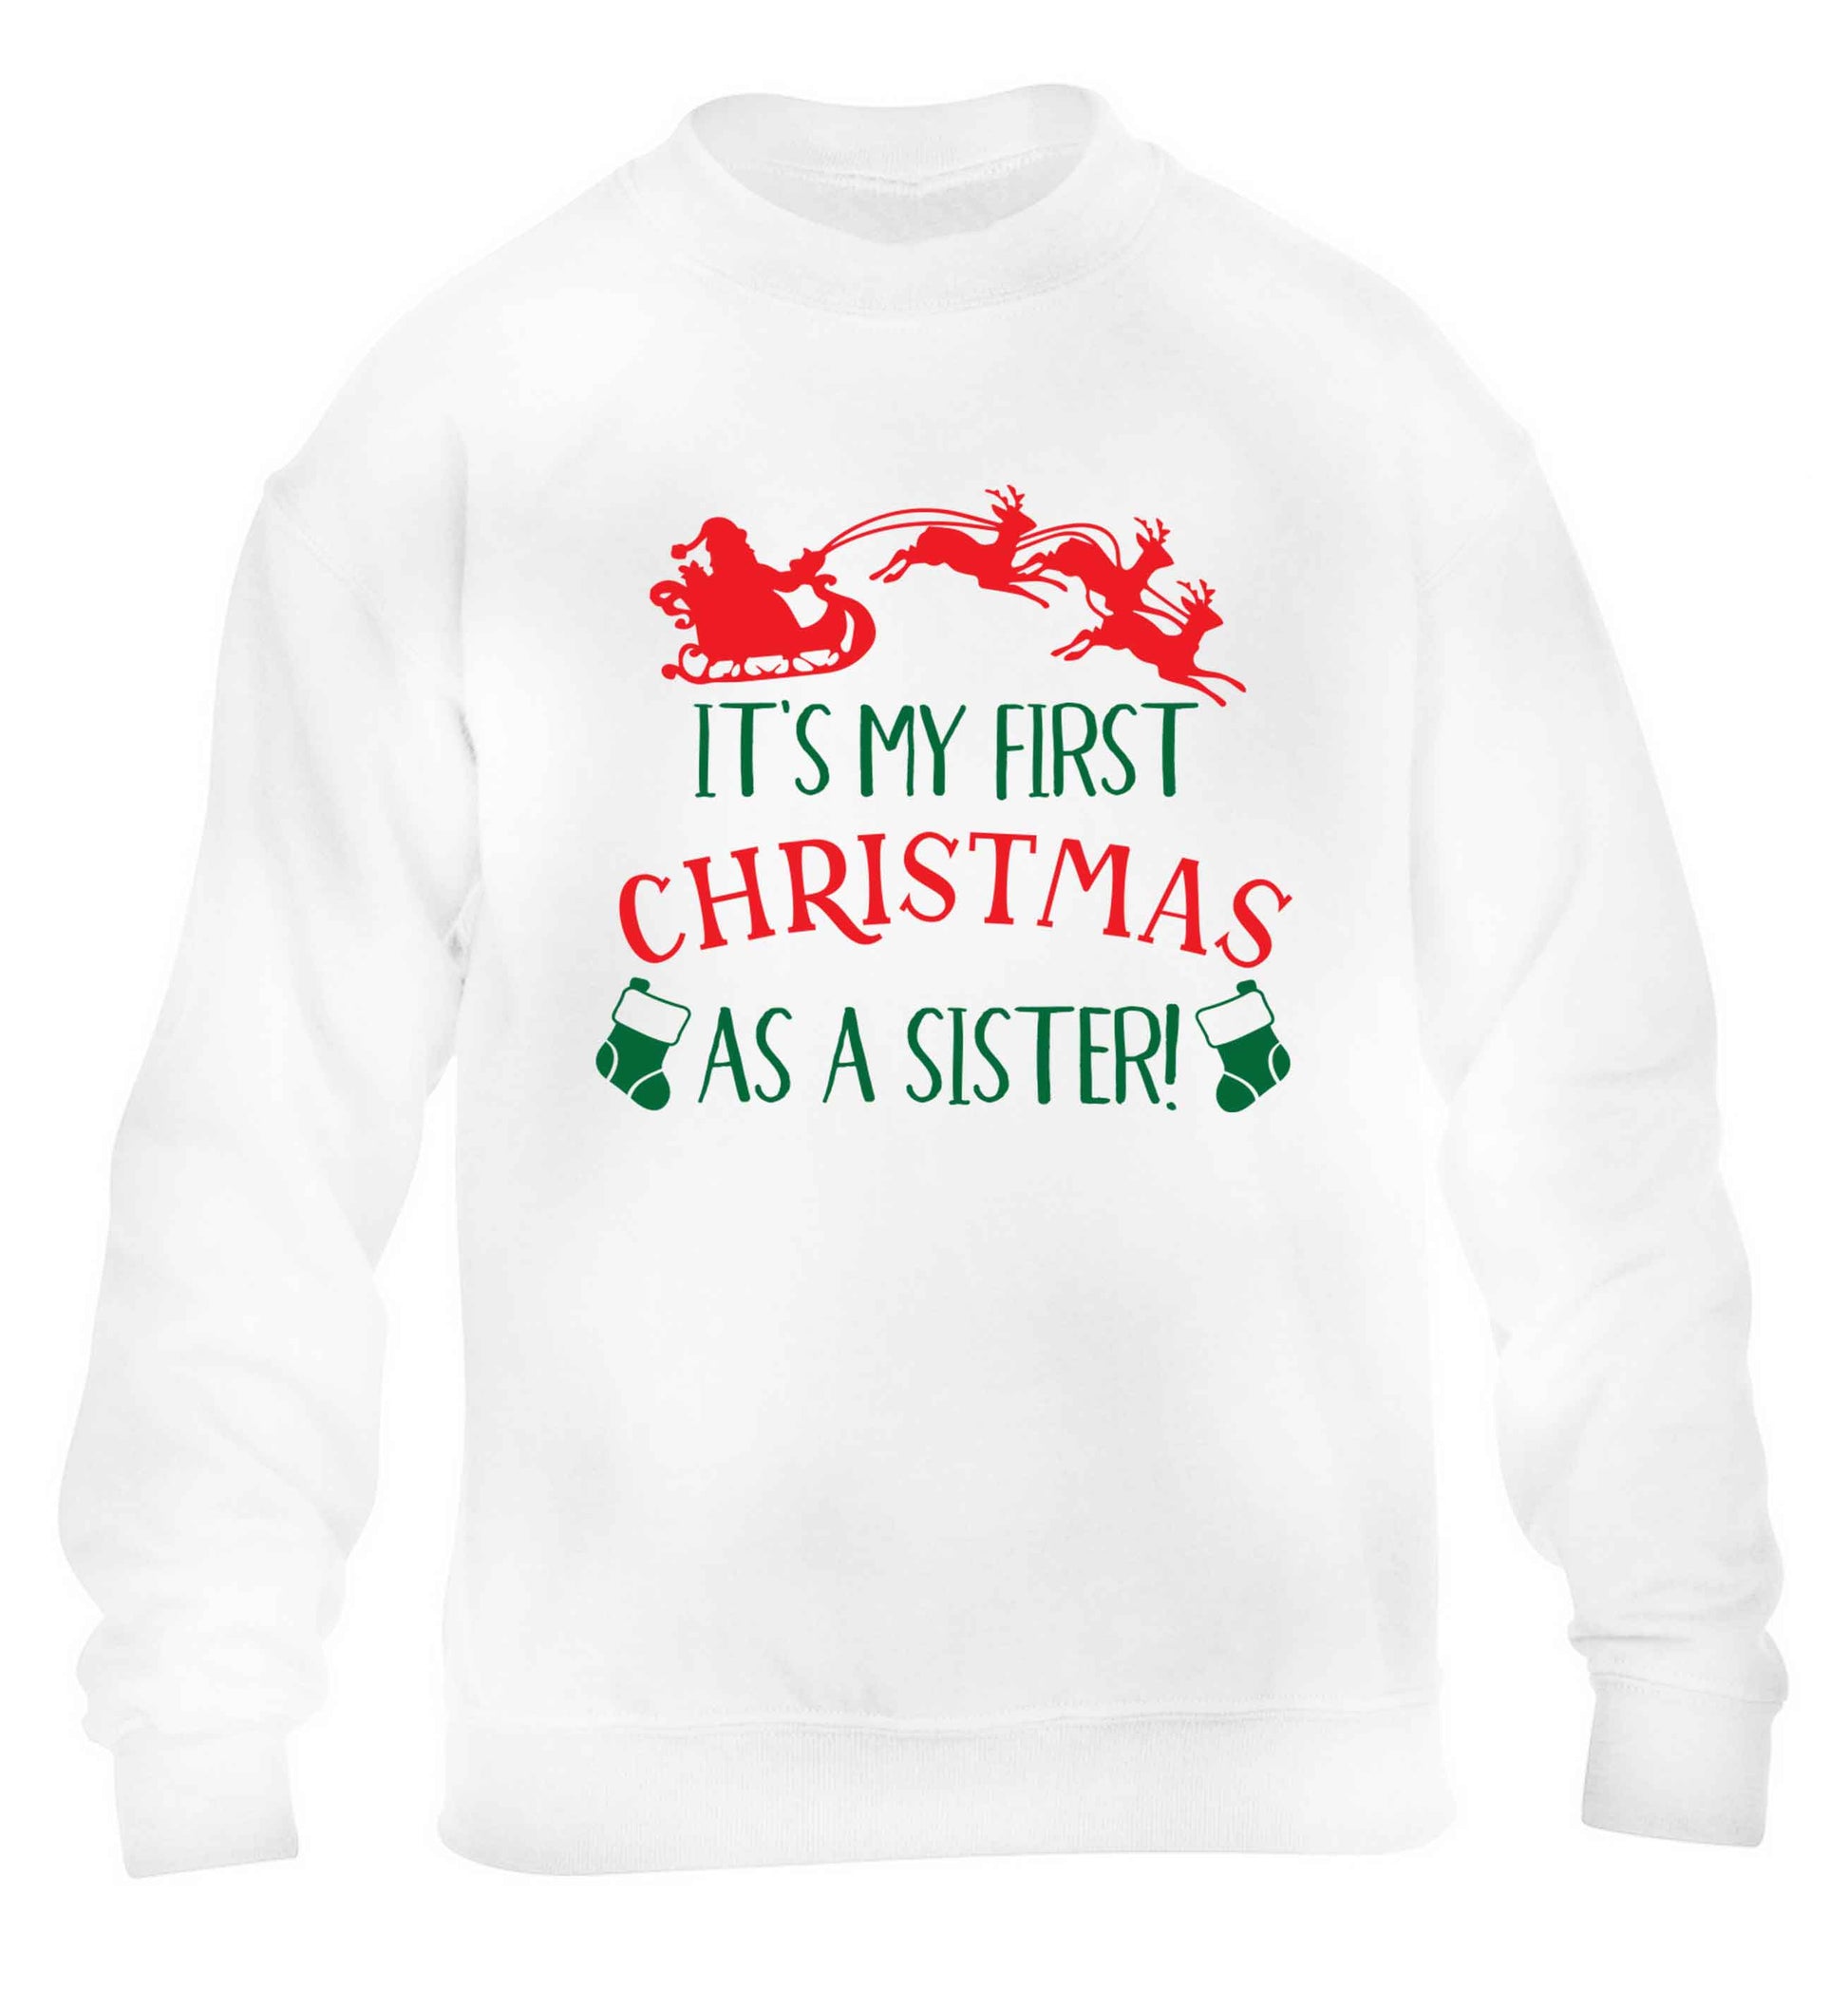 It's my first Christmas as a sister! children's white sweater 12-13 Years